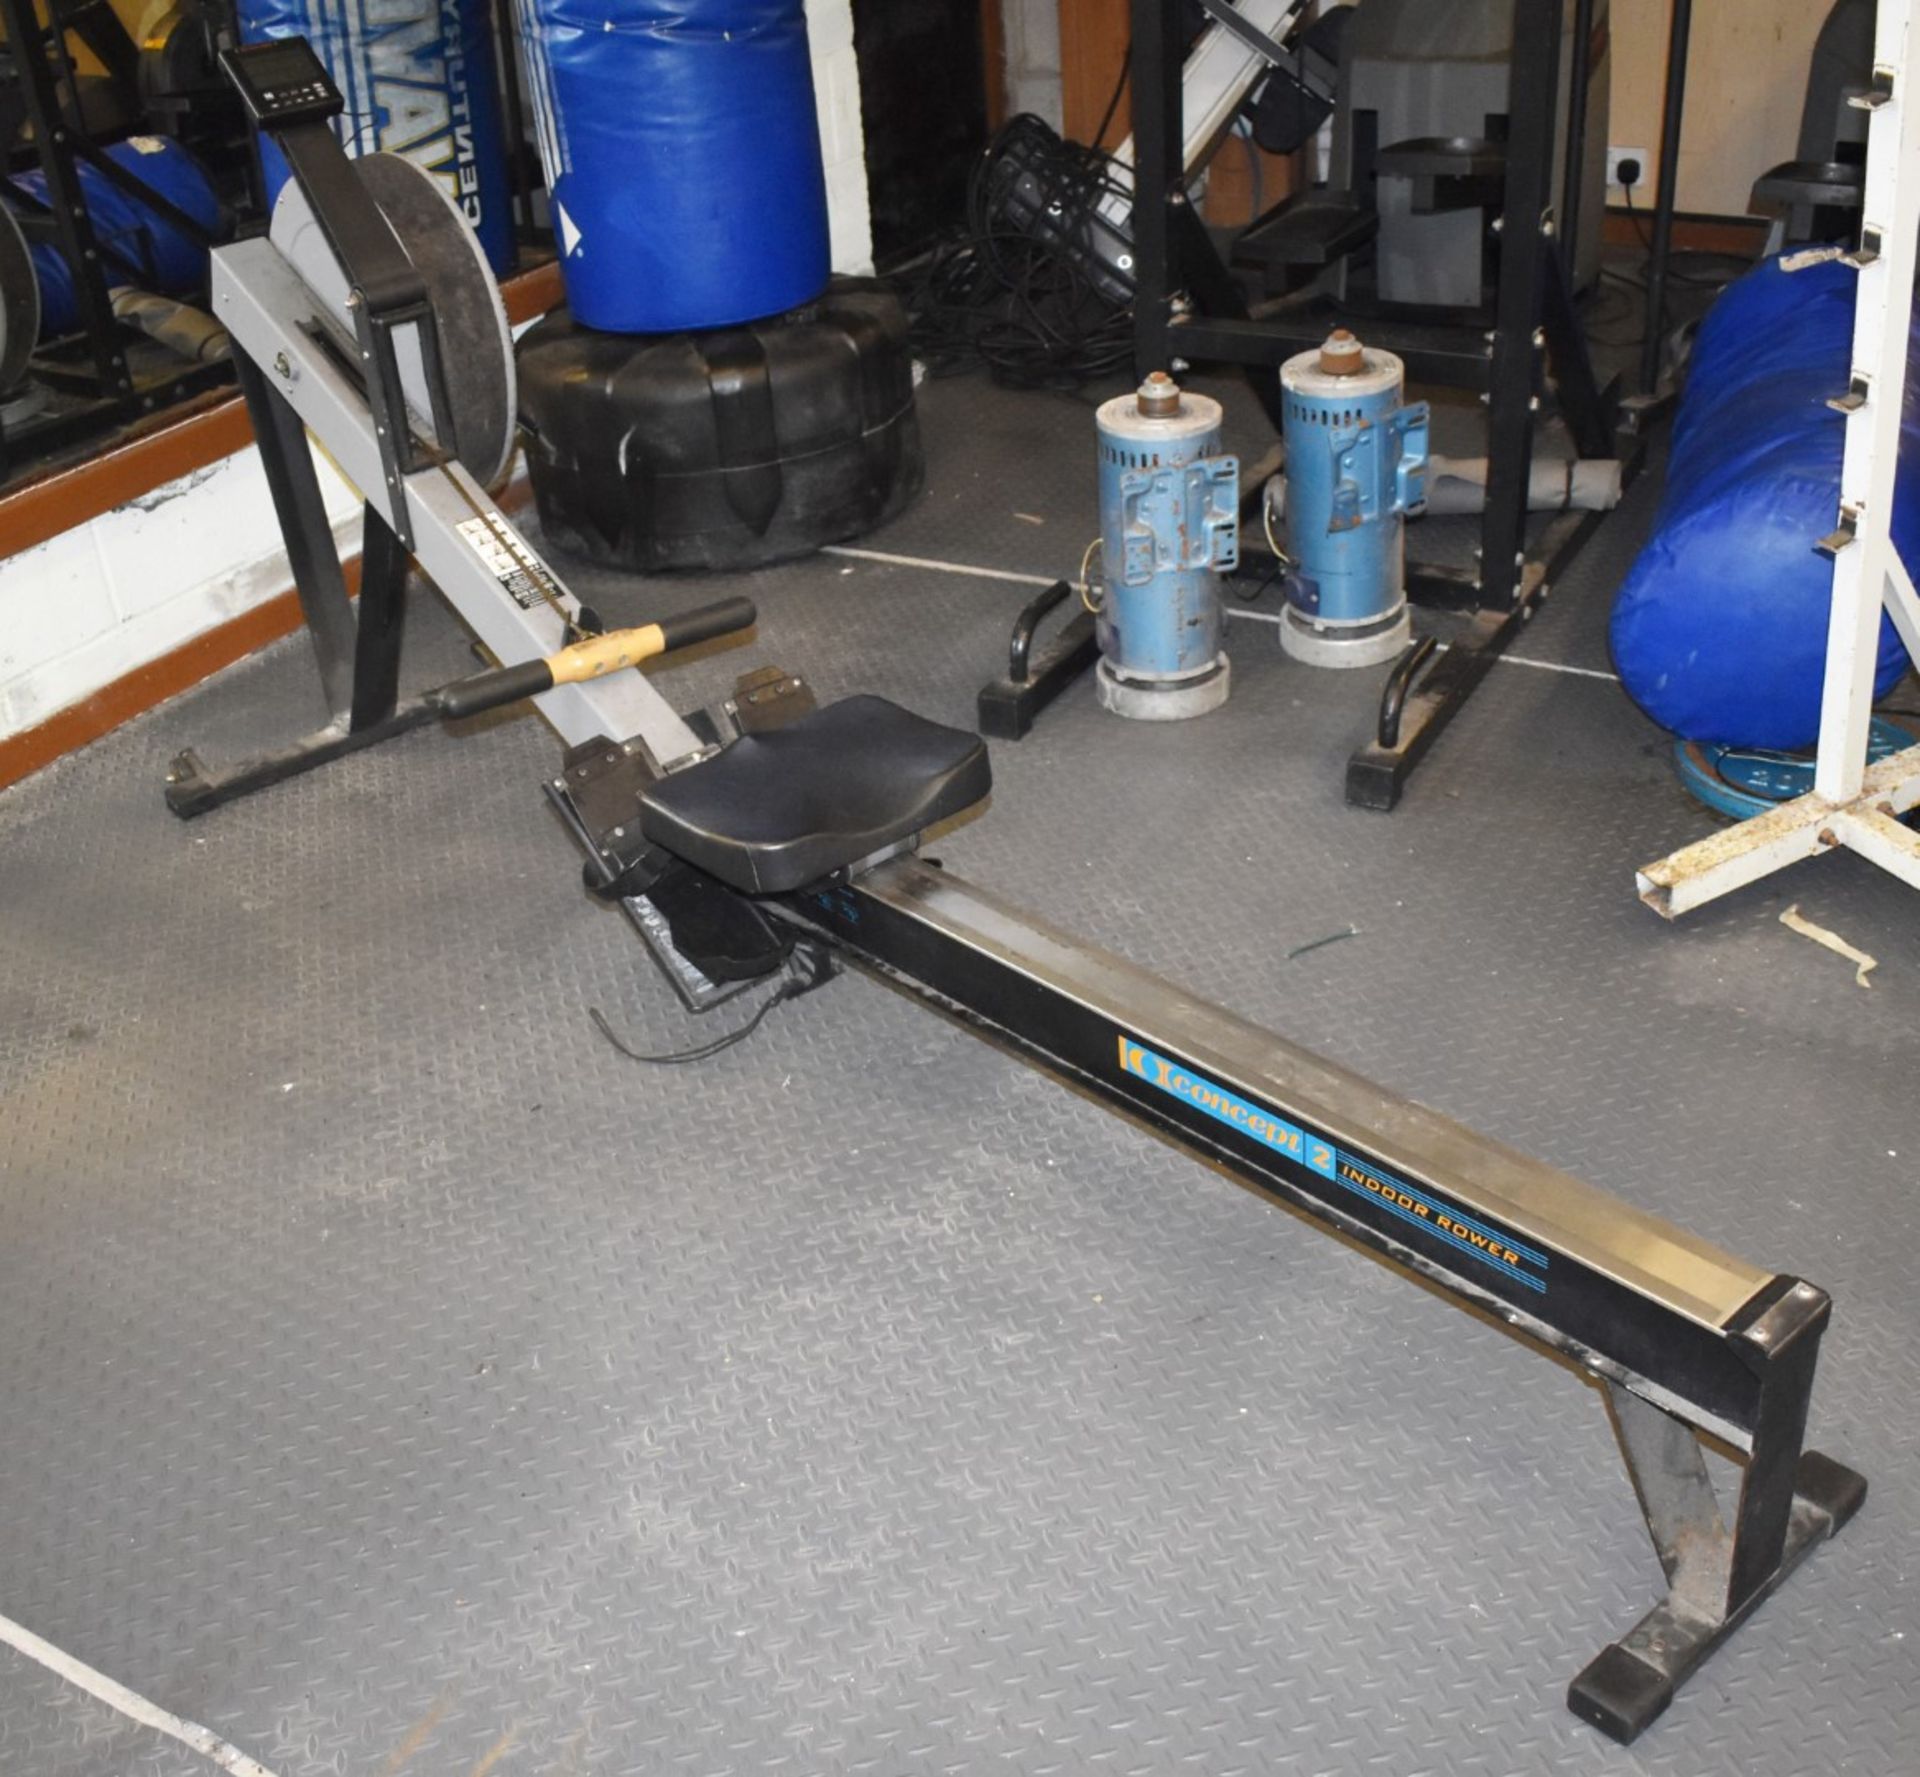 Contents of Bodybuilding and Strongman Gym - Includes Approx 30 Pieces of Gym Equipment, Floor Mats, - Image 62 of 95